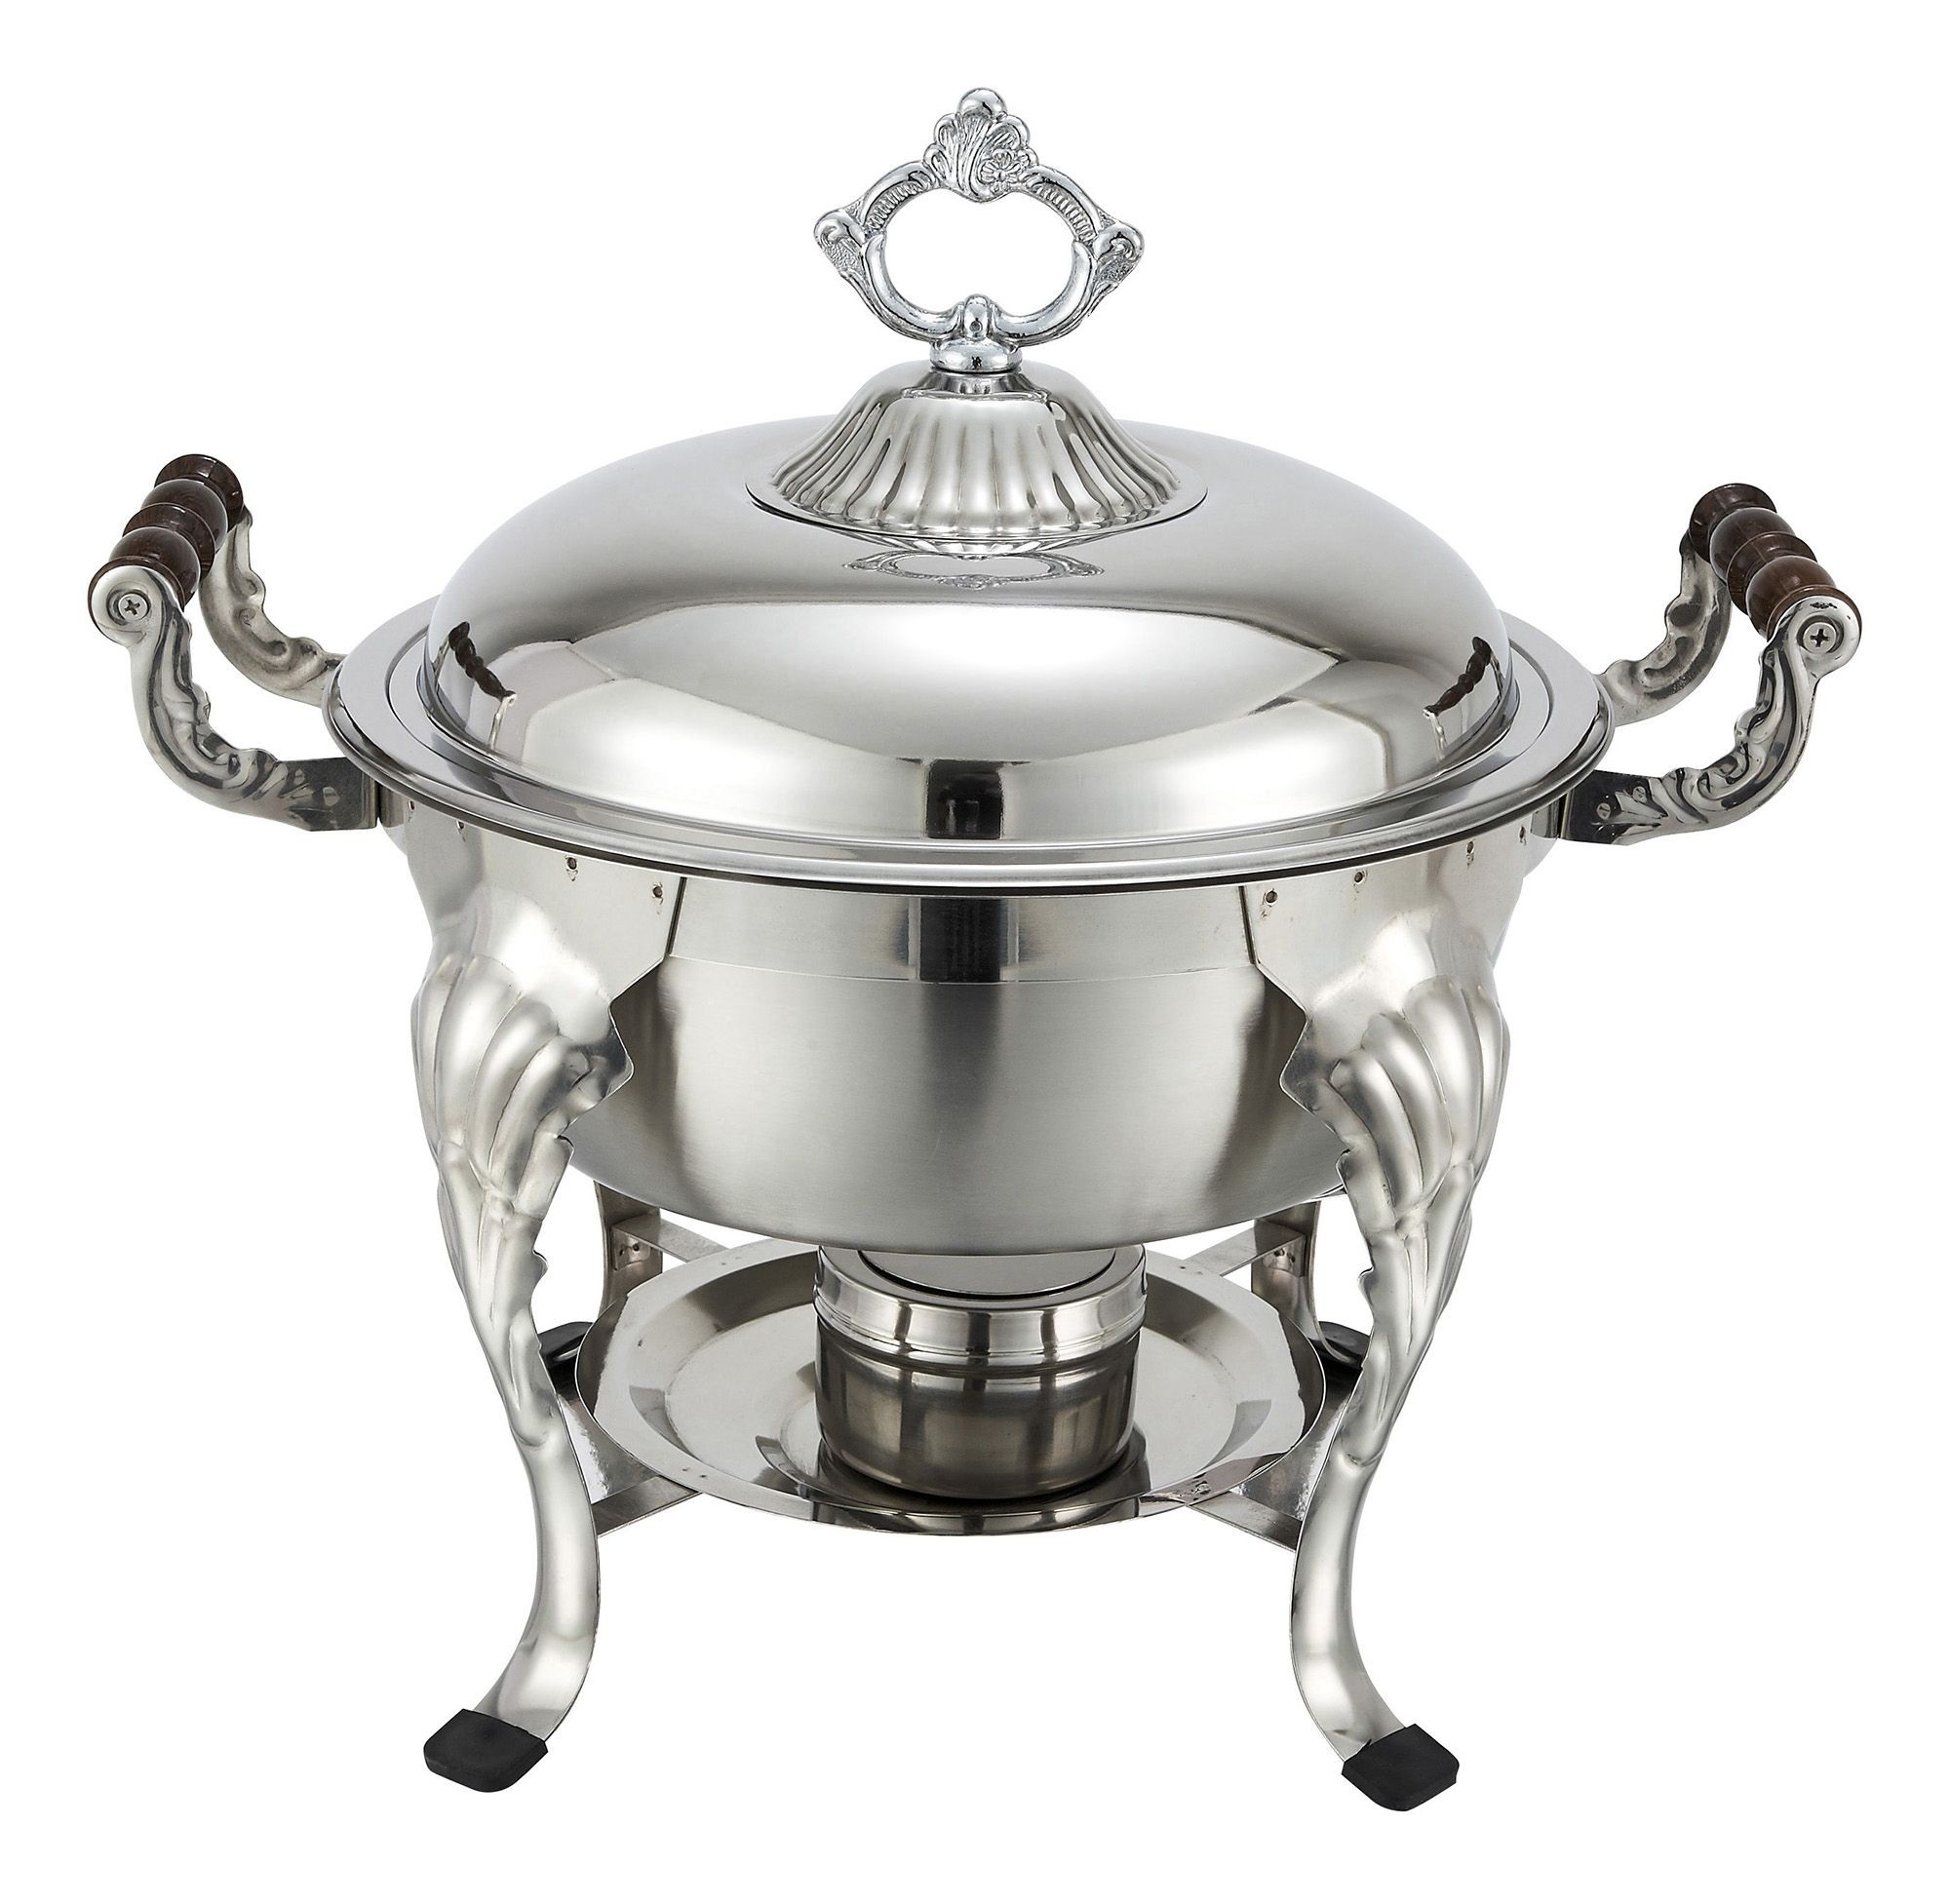 Winco 708 Crown Collection 6 Qt. Round Chafer with Dome Cover